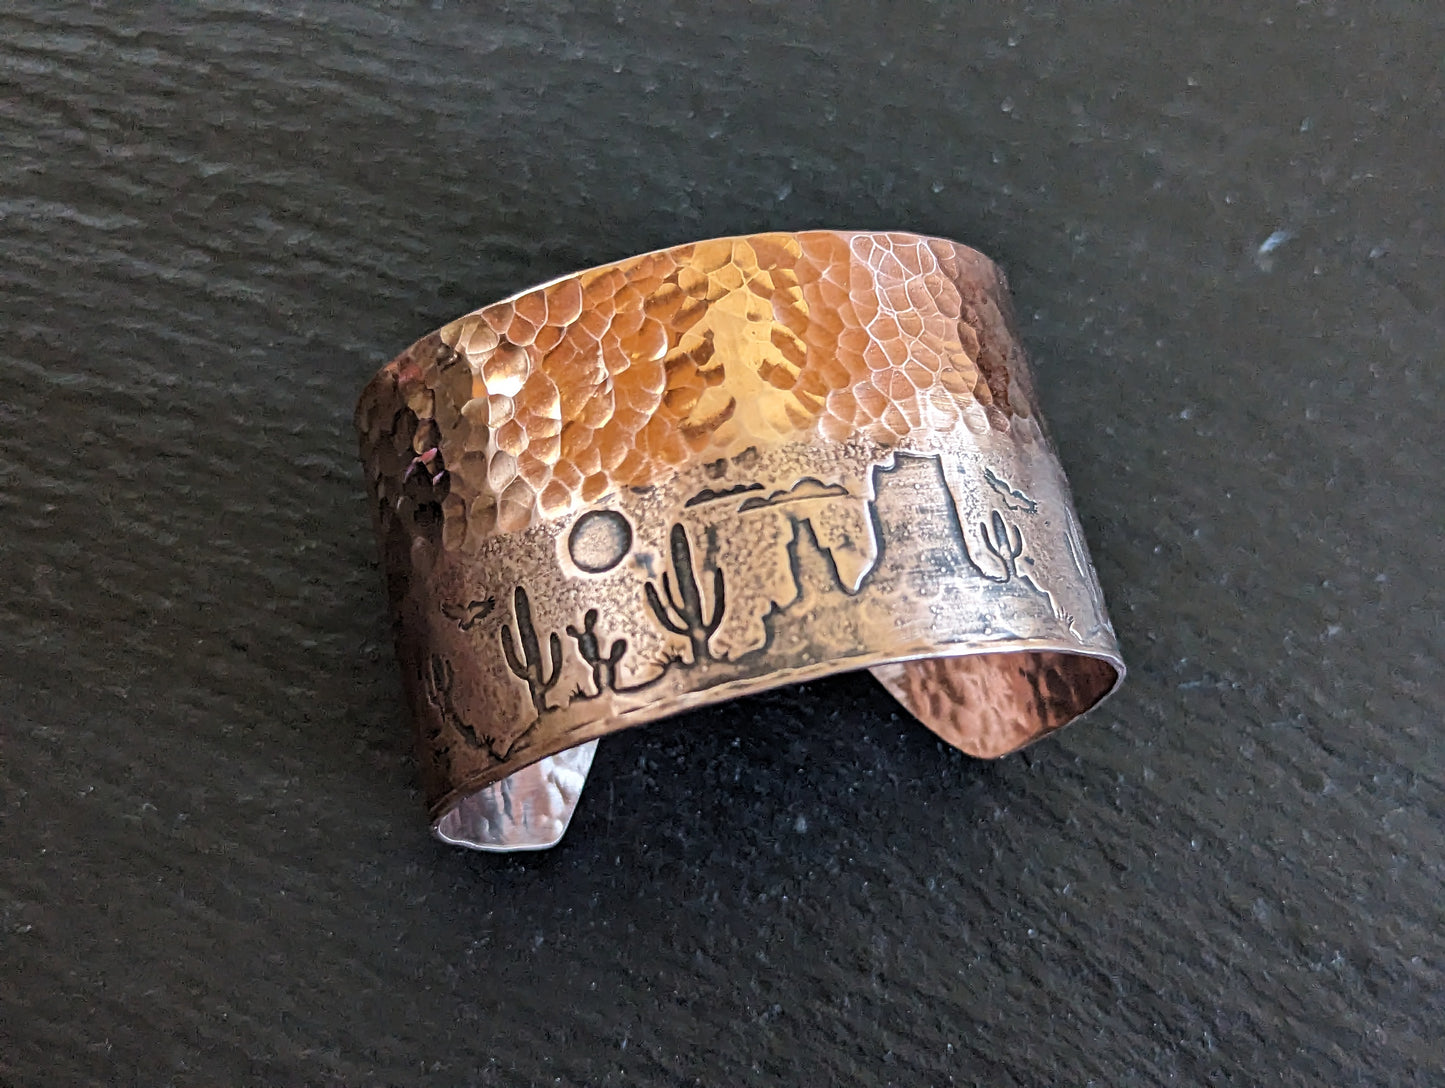 Copper cuff bracelet with hammered texture and cactus and monument mountains - Arizona desert scene